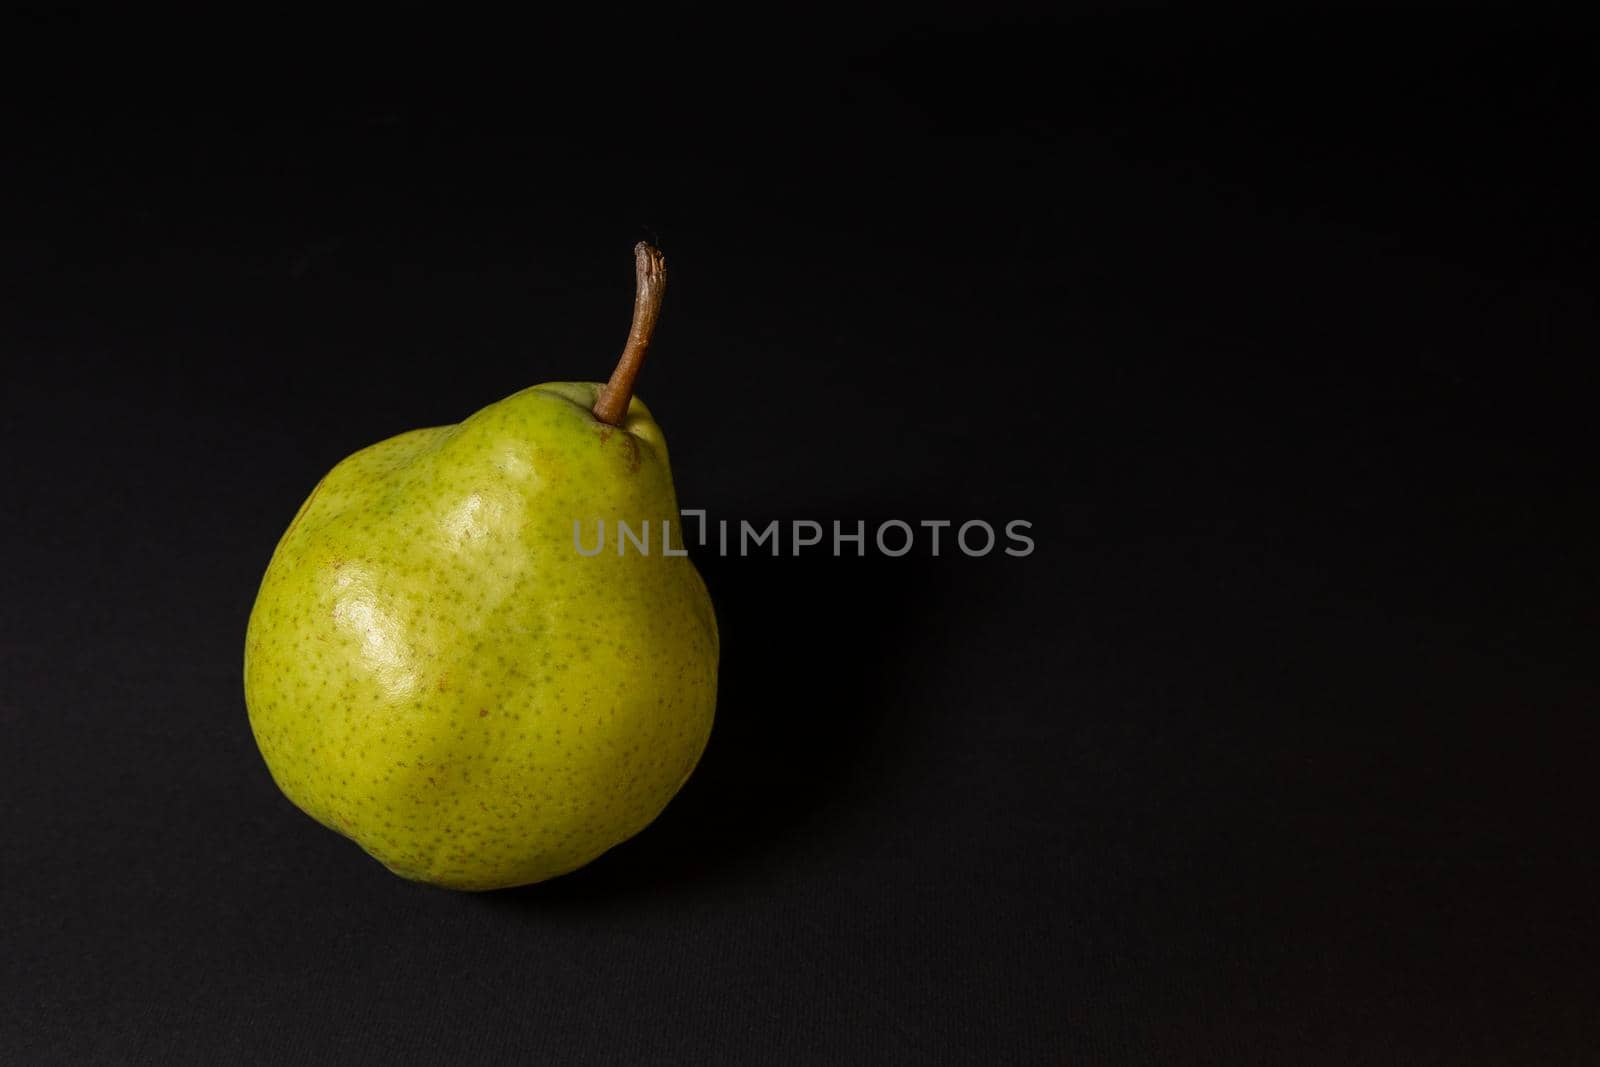 Ripe green pear on a dark background, late november pear variety. Whole fruit